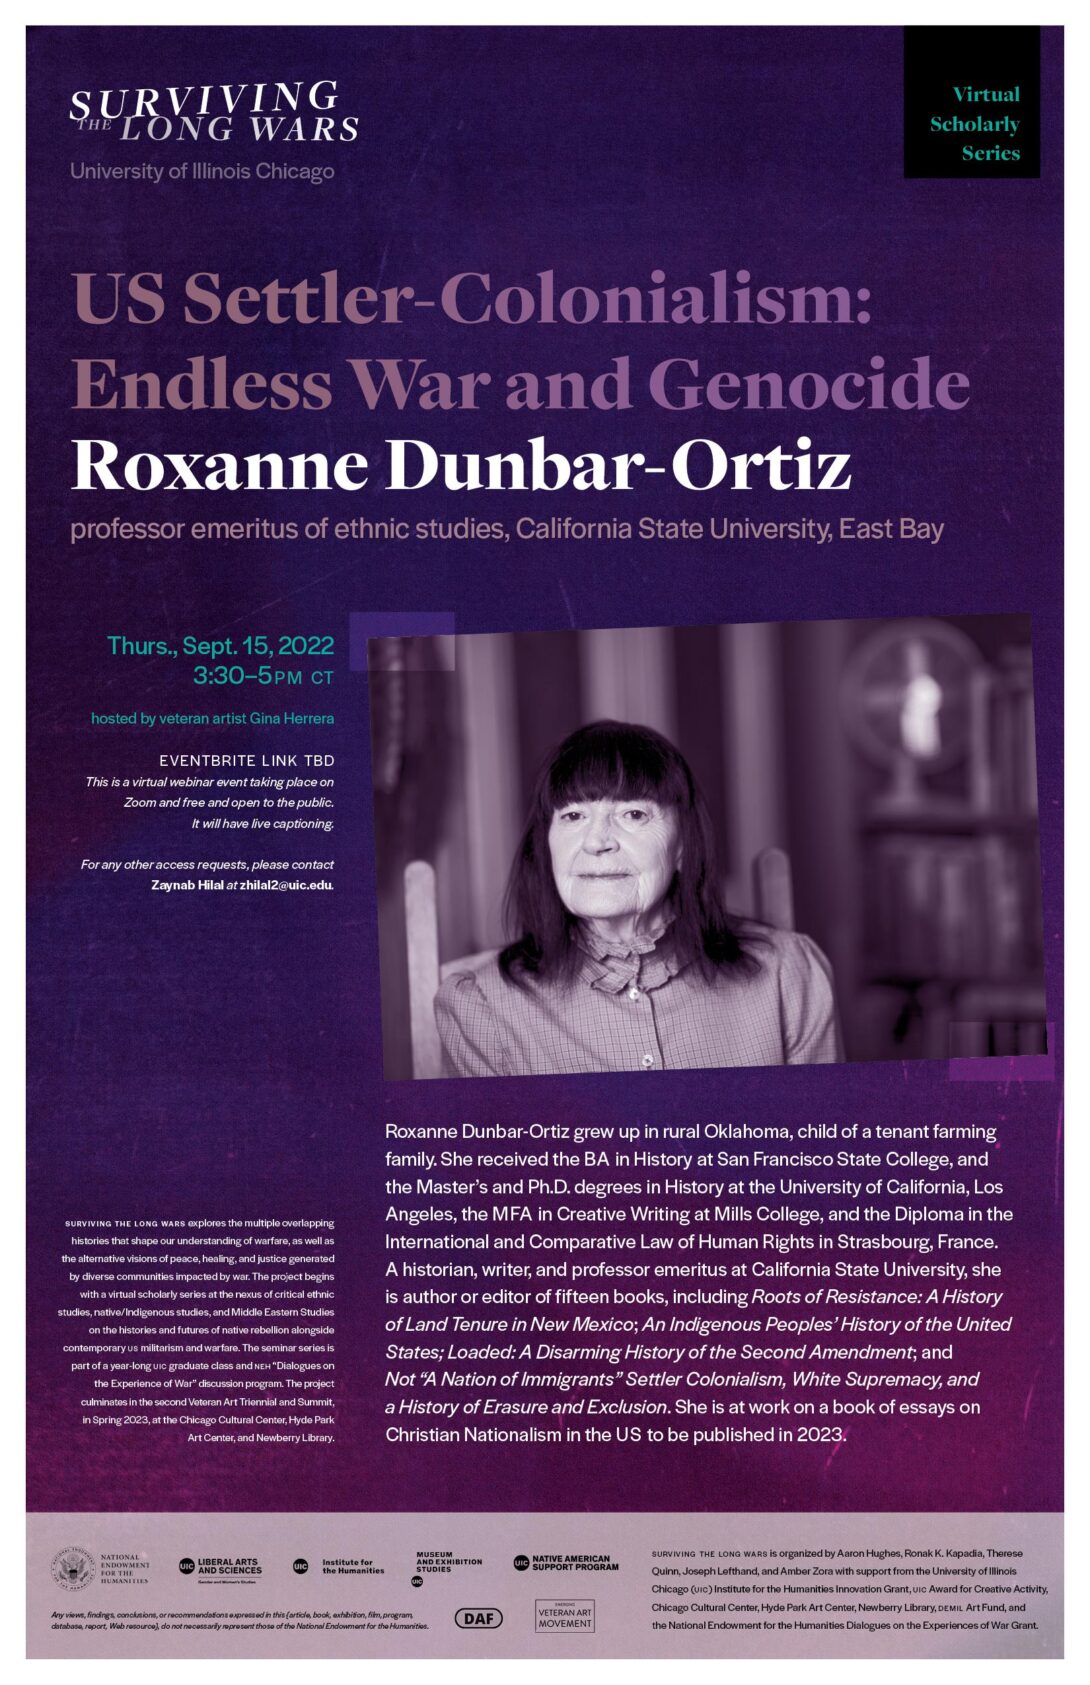 A dark purple poster with white text announcing a virtual lecture by Professor Roxanne Dunbar-Ortiz on Thursday, September 15th. The project’s title 'Surviving the Long Wars' is written in large text at the top of the flyer along with the Scholar Series’s title “US Settler-Colonialism: Endless War and Genocide”. The poster has a headshot of Professor Dunbar-Ortiz, her bio, and details about the series.